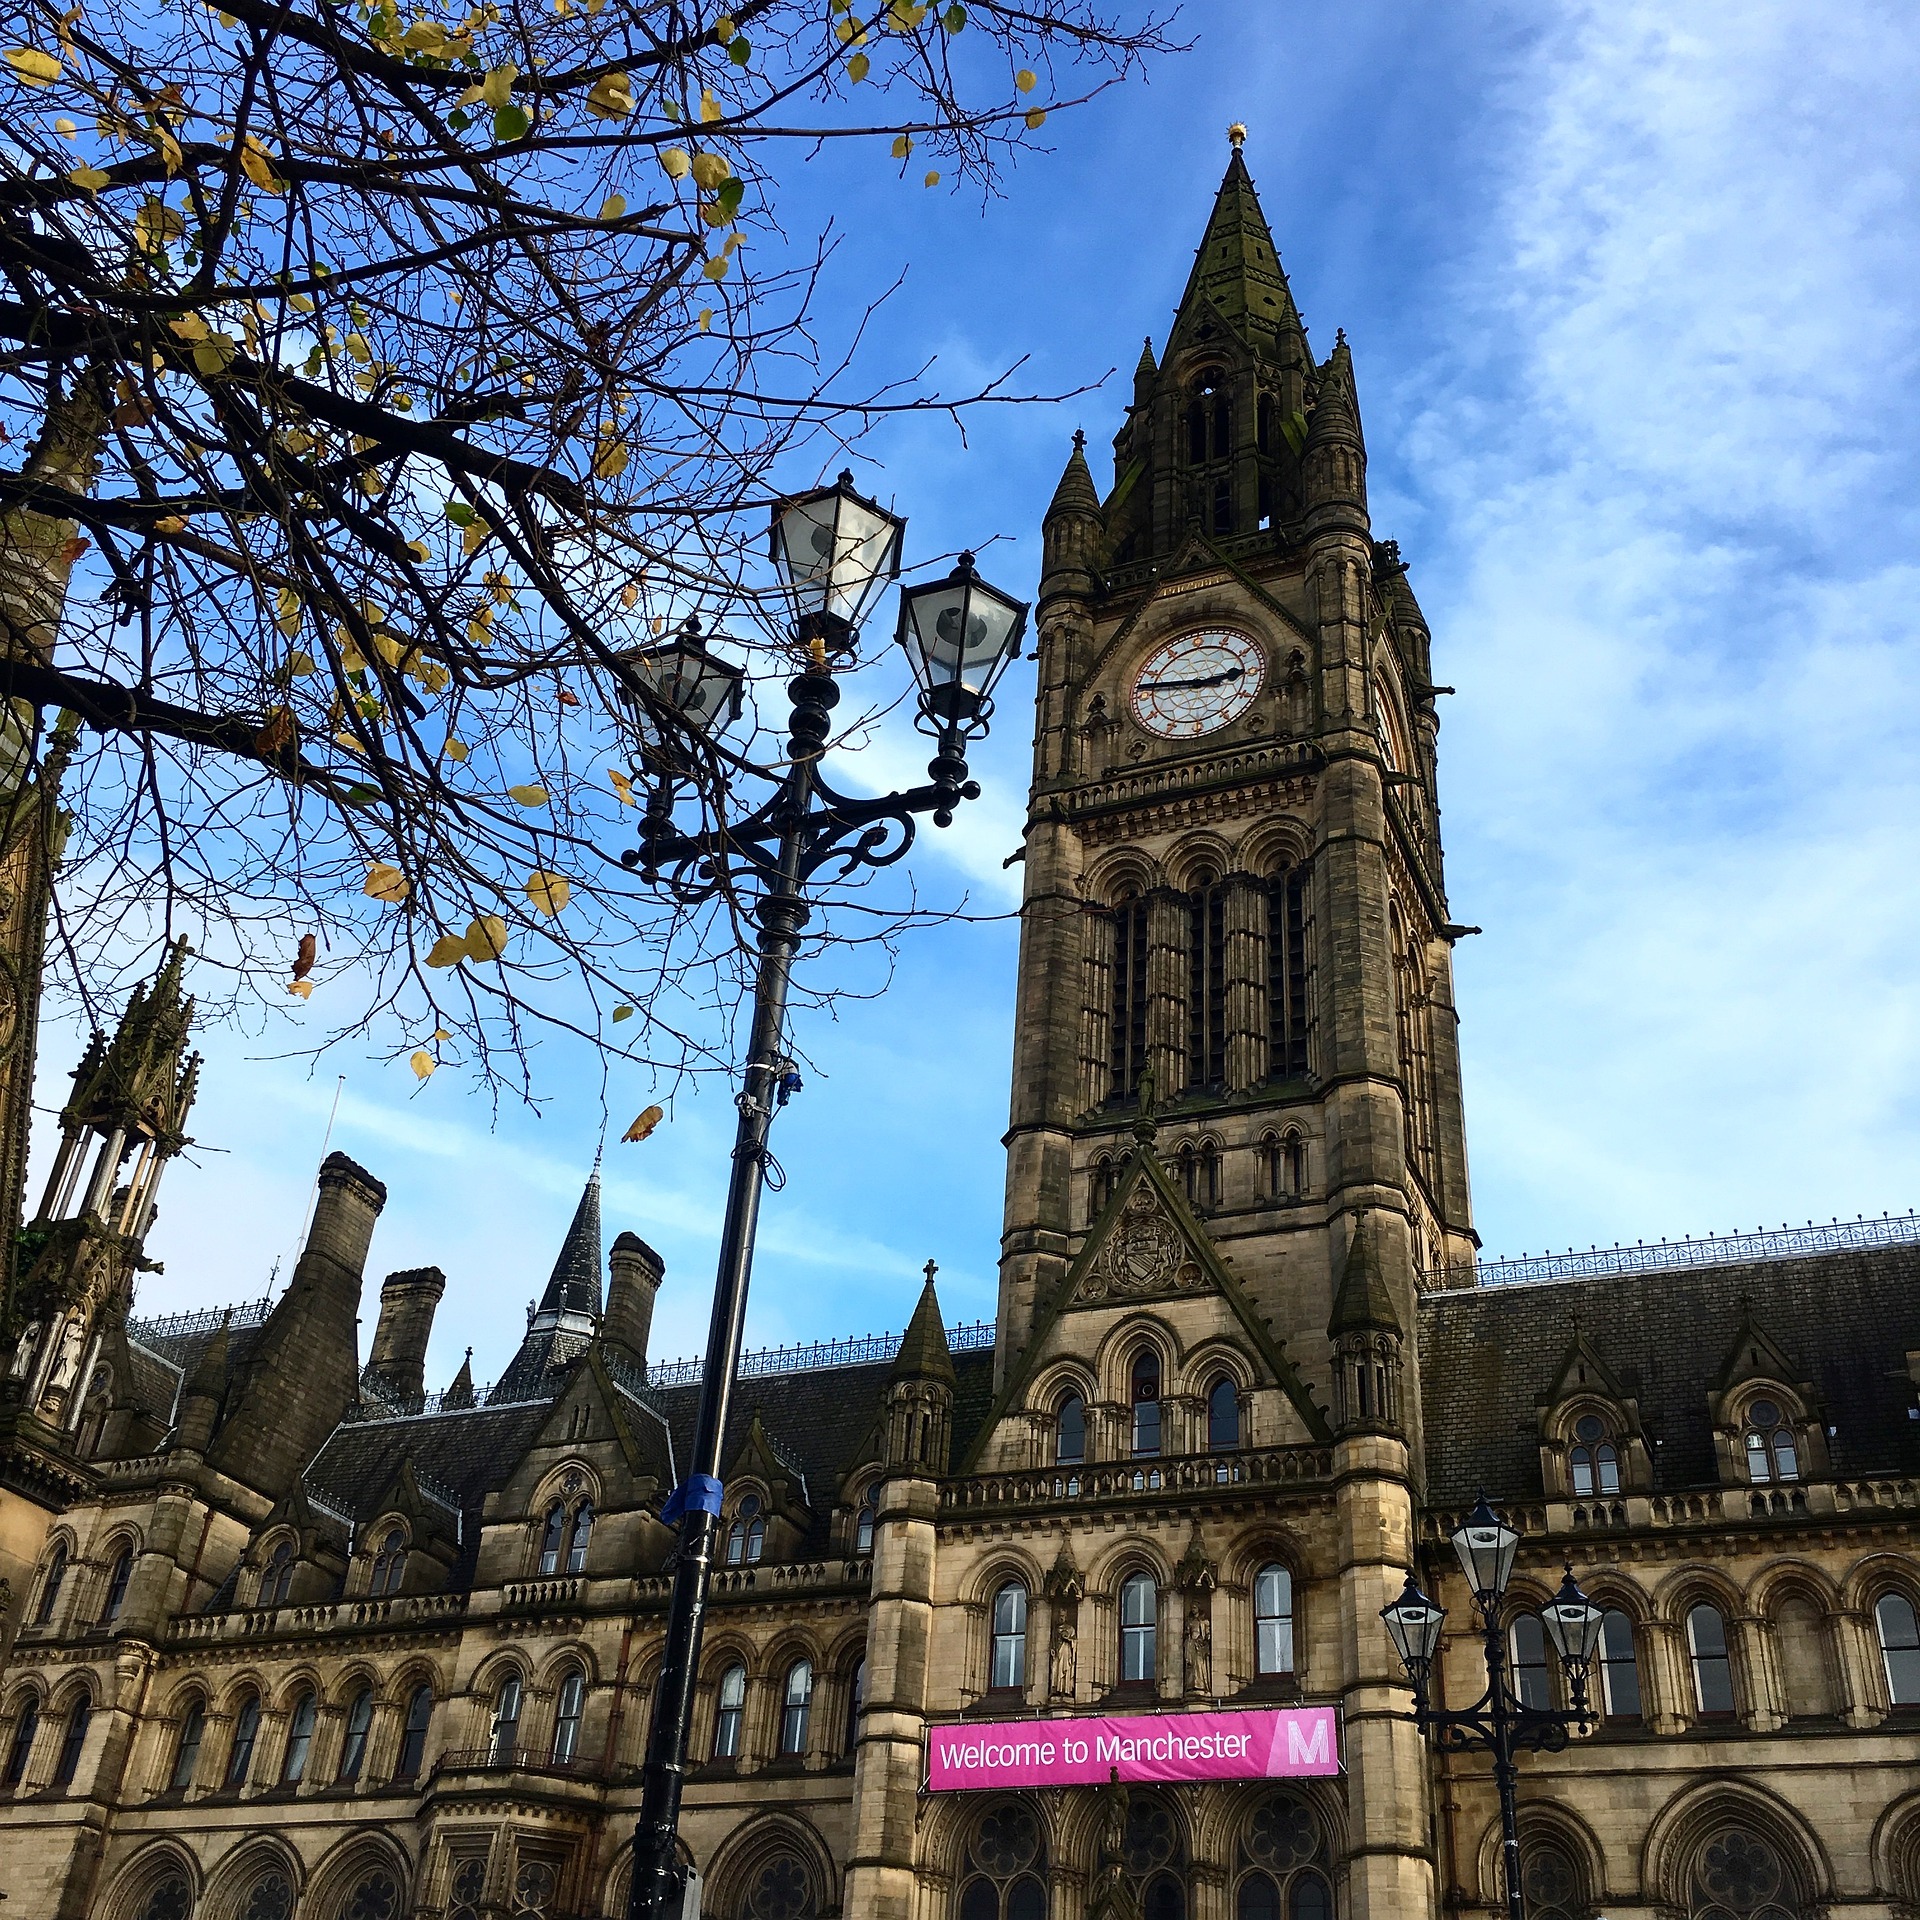 Manchester - What to do for a weekend in Manchester - The LDN Gal